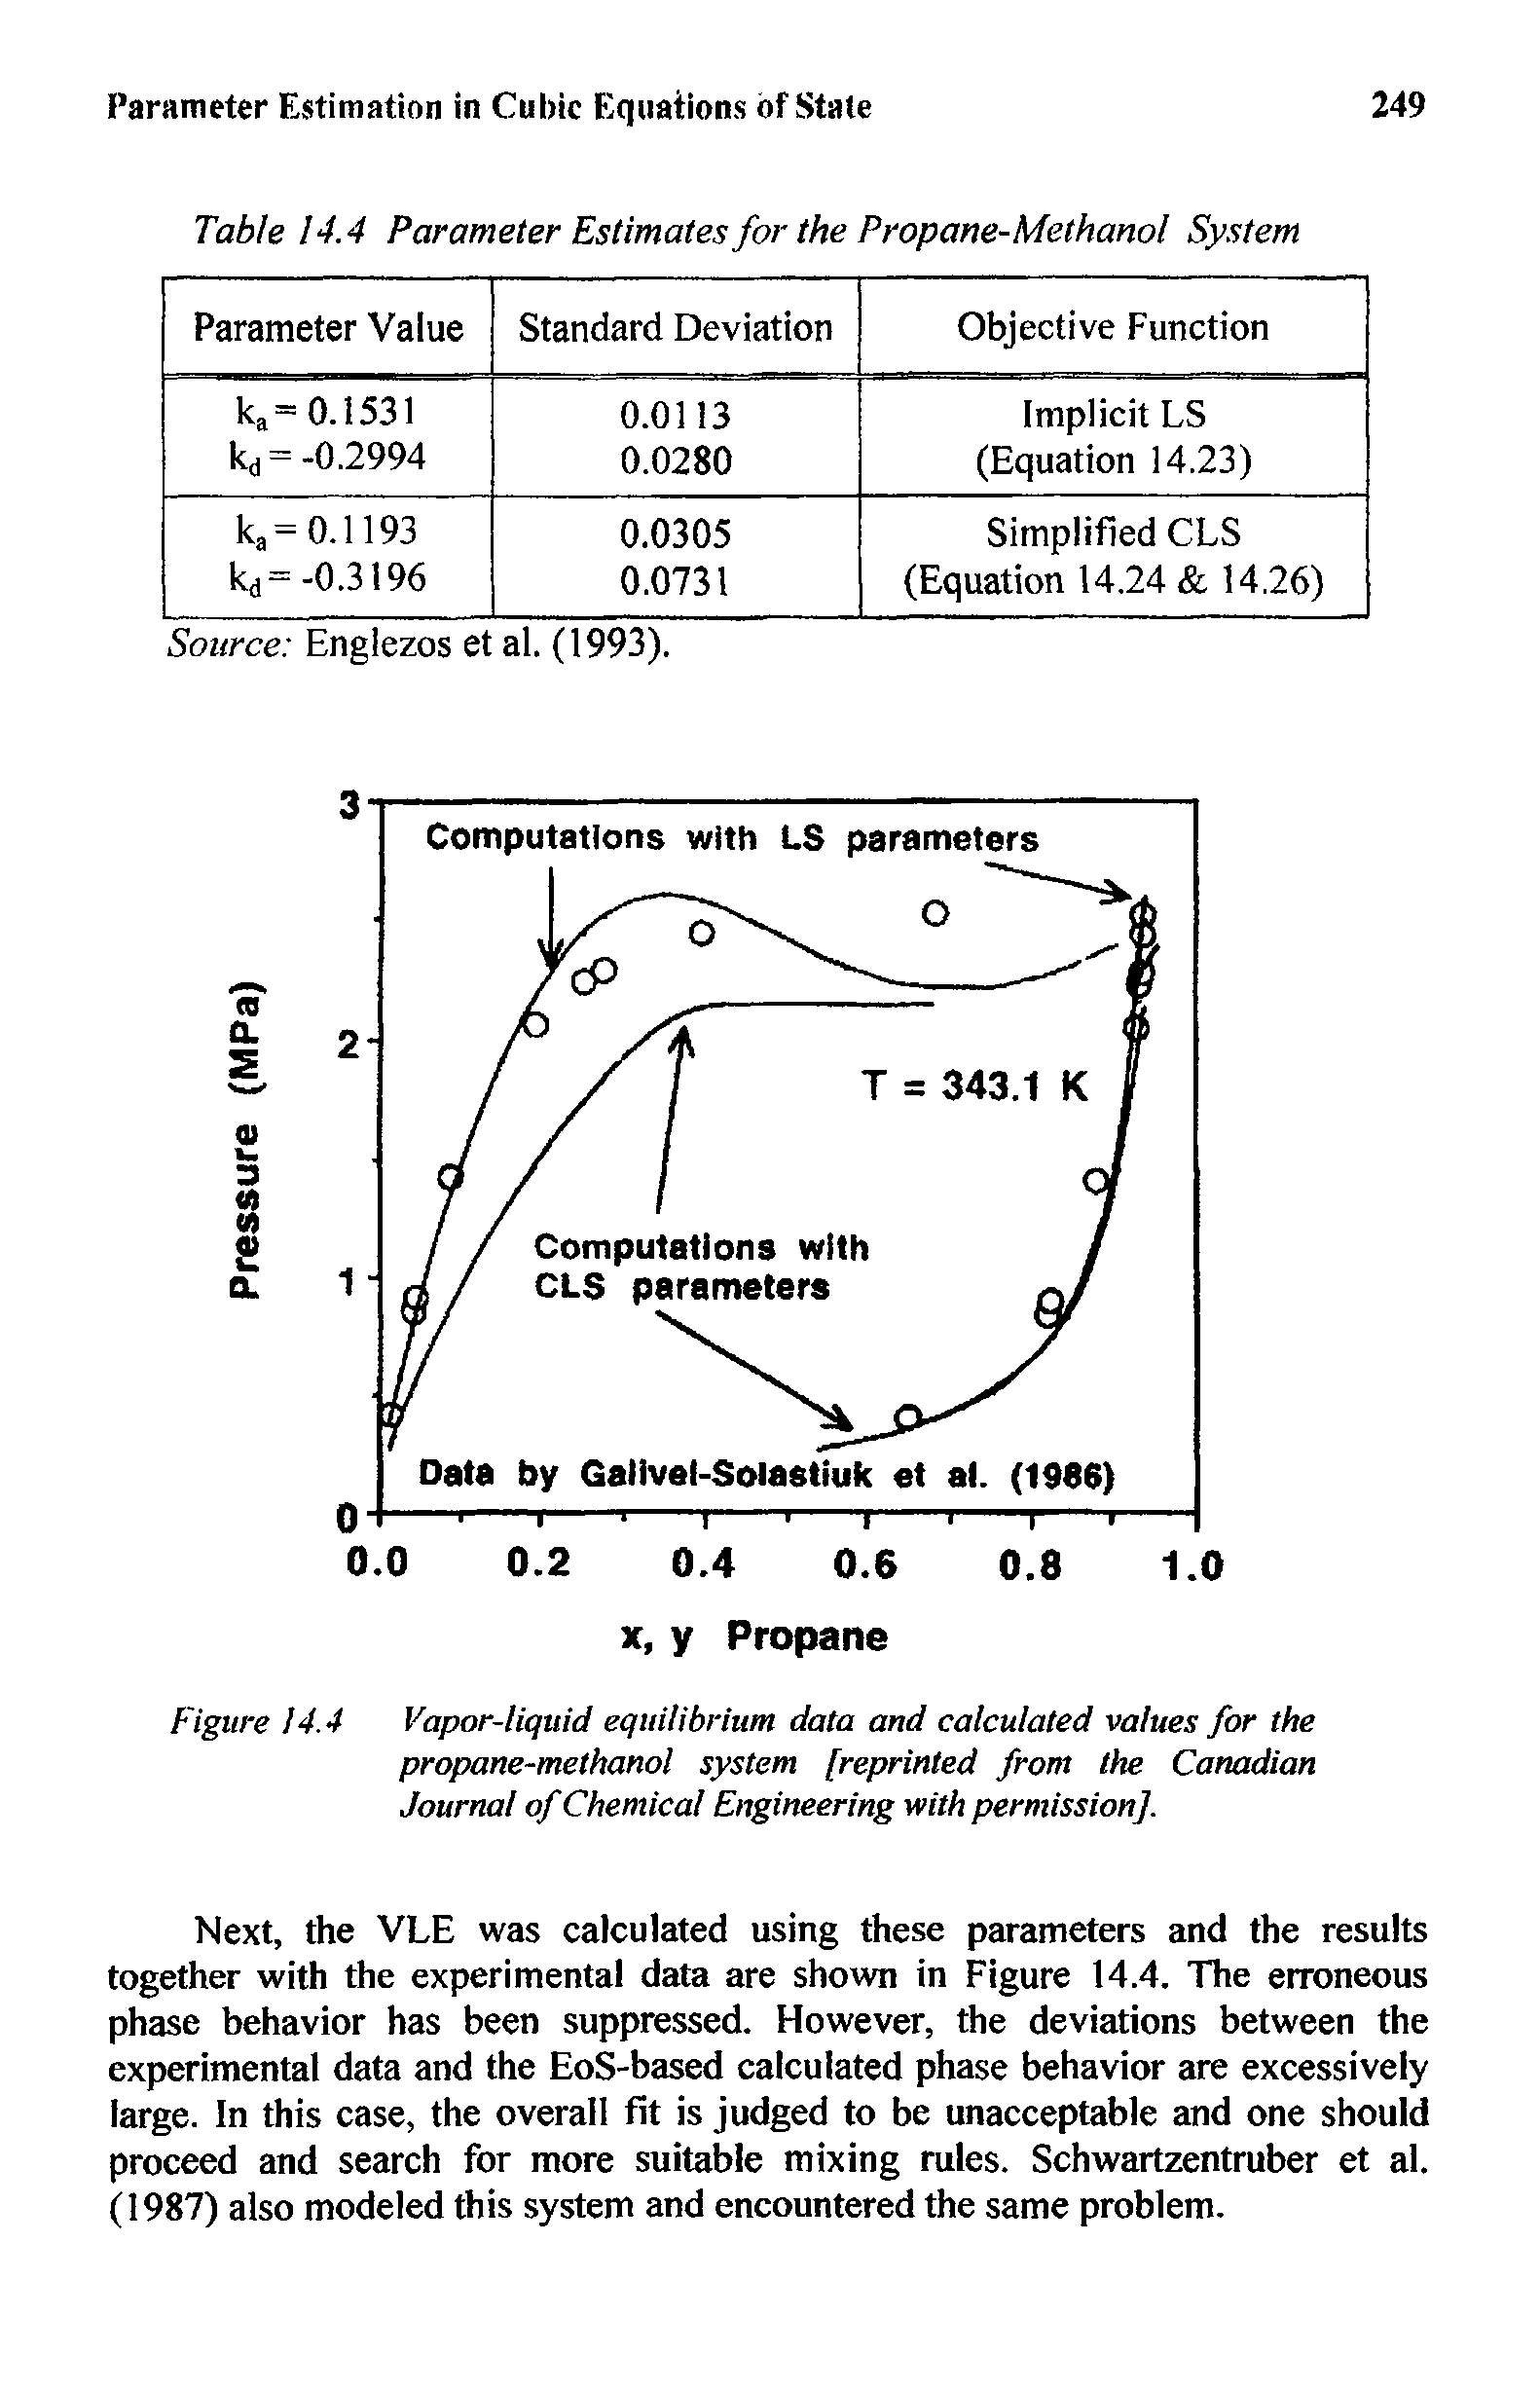 Figure 14.4 Vapor-liquid equilibrium data and calculated values for the propane-methanol system [reprinted from the Canadian Journal of Chemical Engineering with permission].